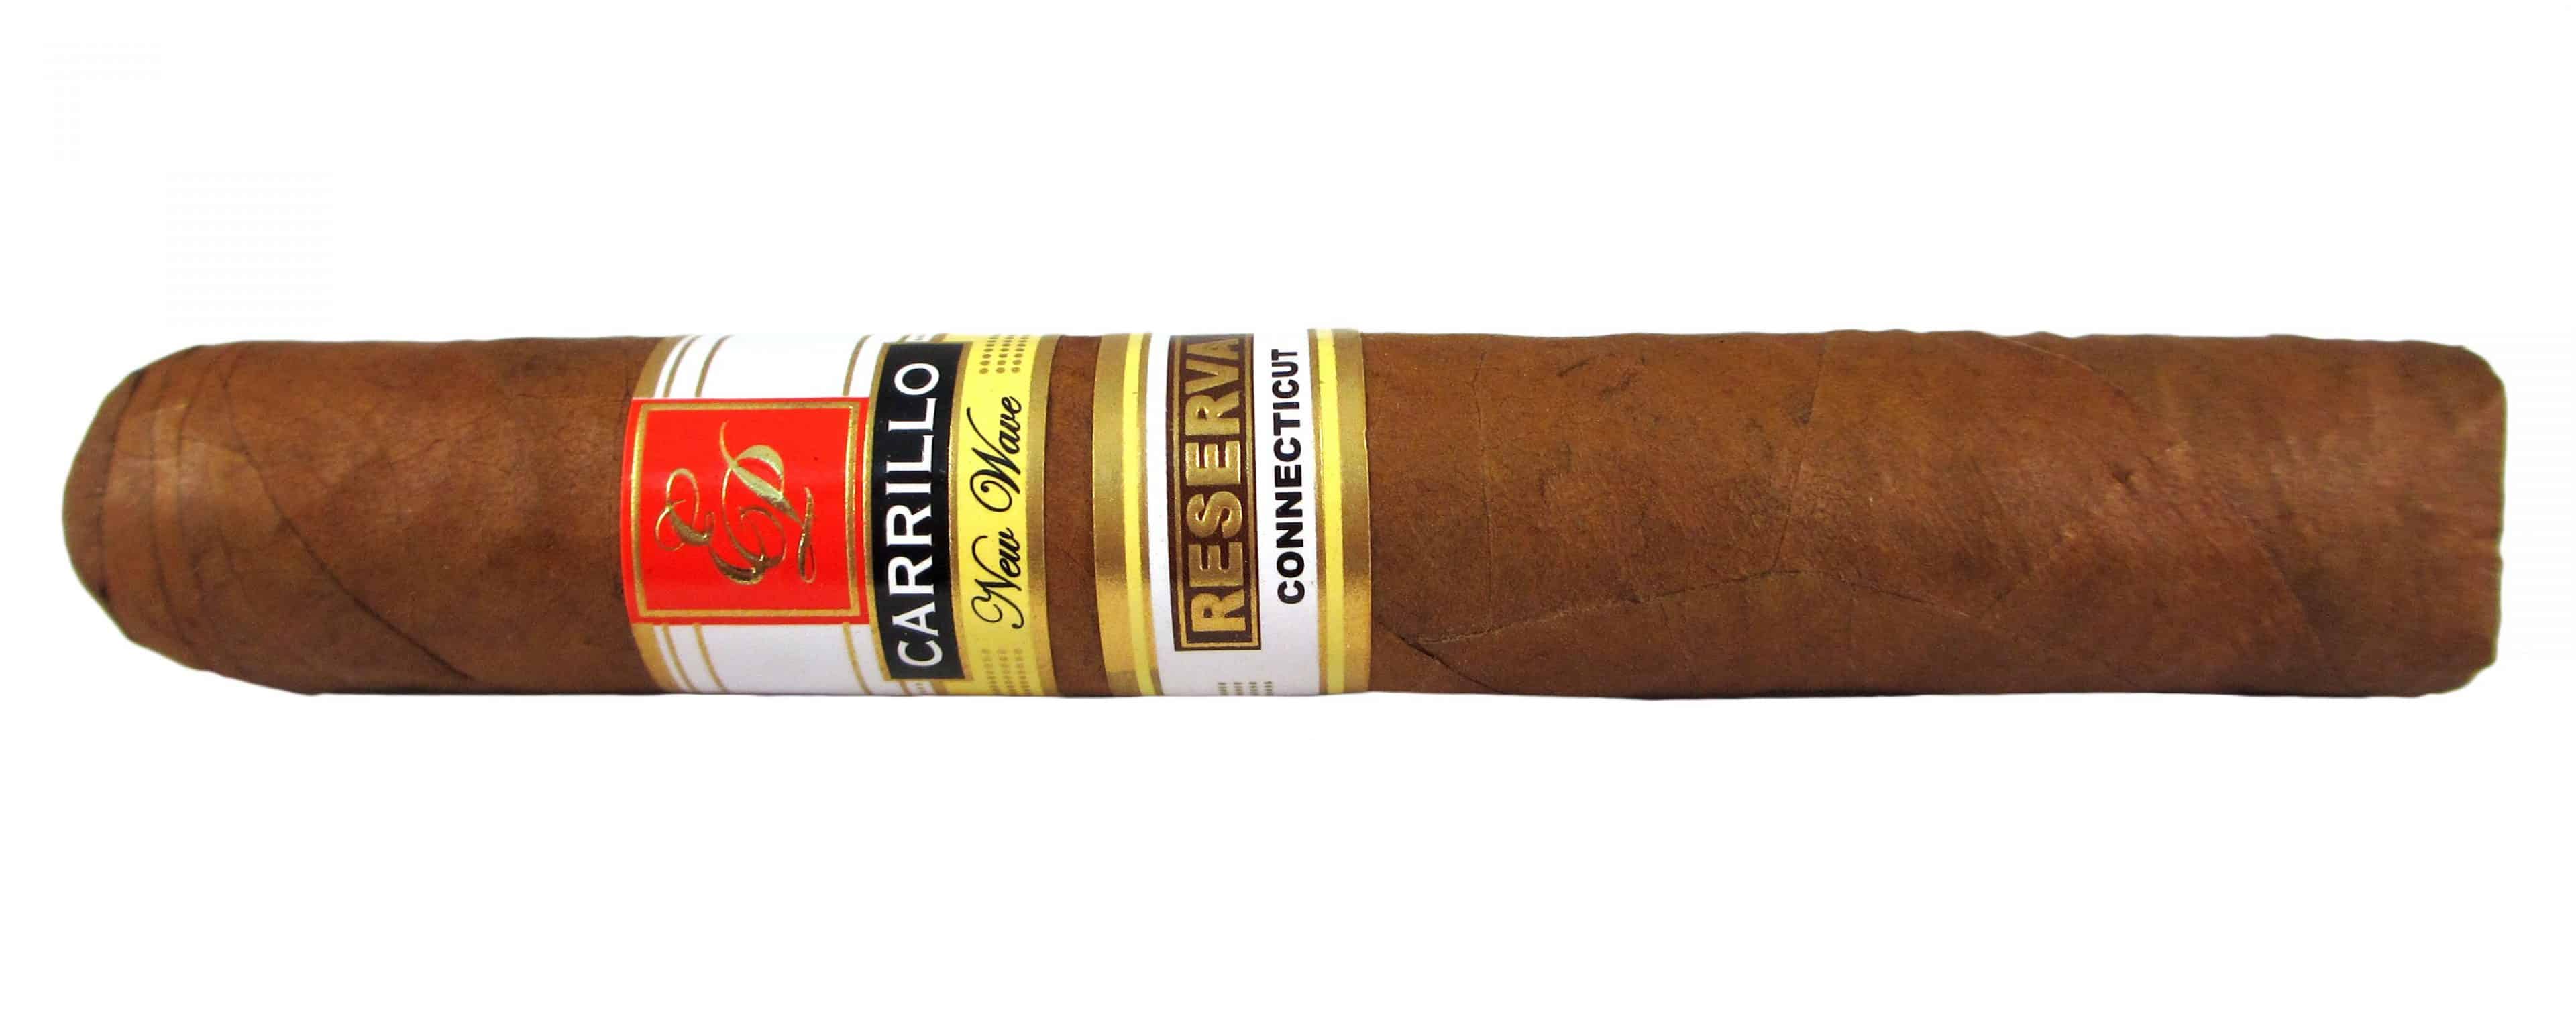 Blind Cigar Review: E.P. Carrillo | New Wave Connecticut Reserva Robusto